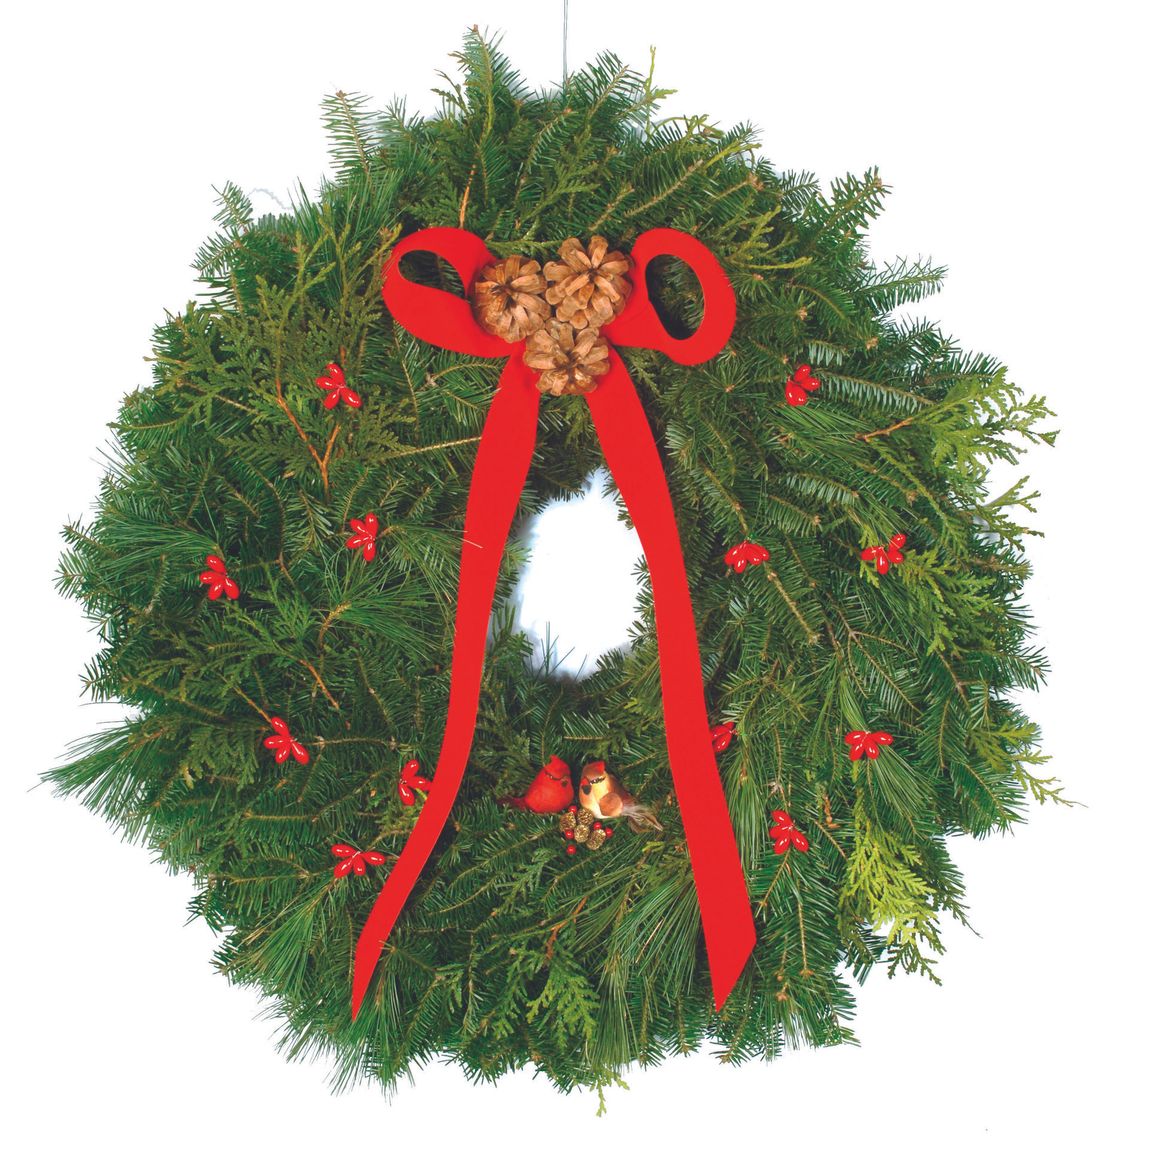 Vermont hand crafted wreaths with two birds, red flowers, and red ribbon